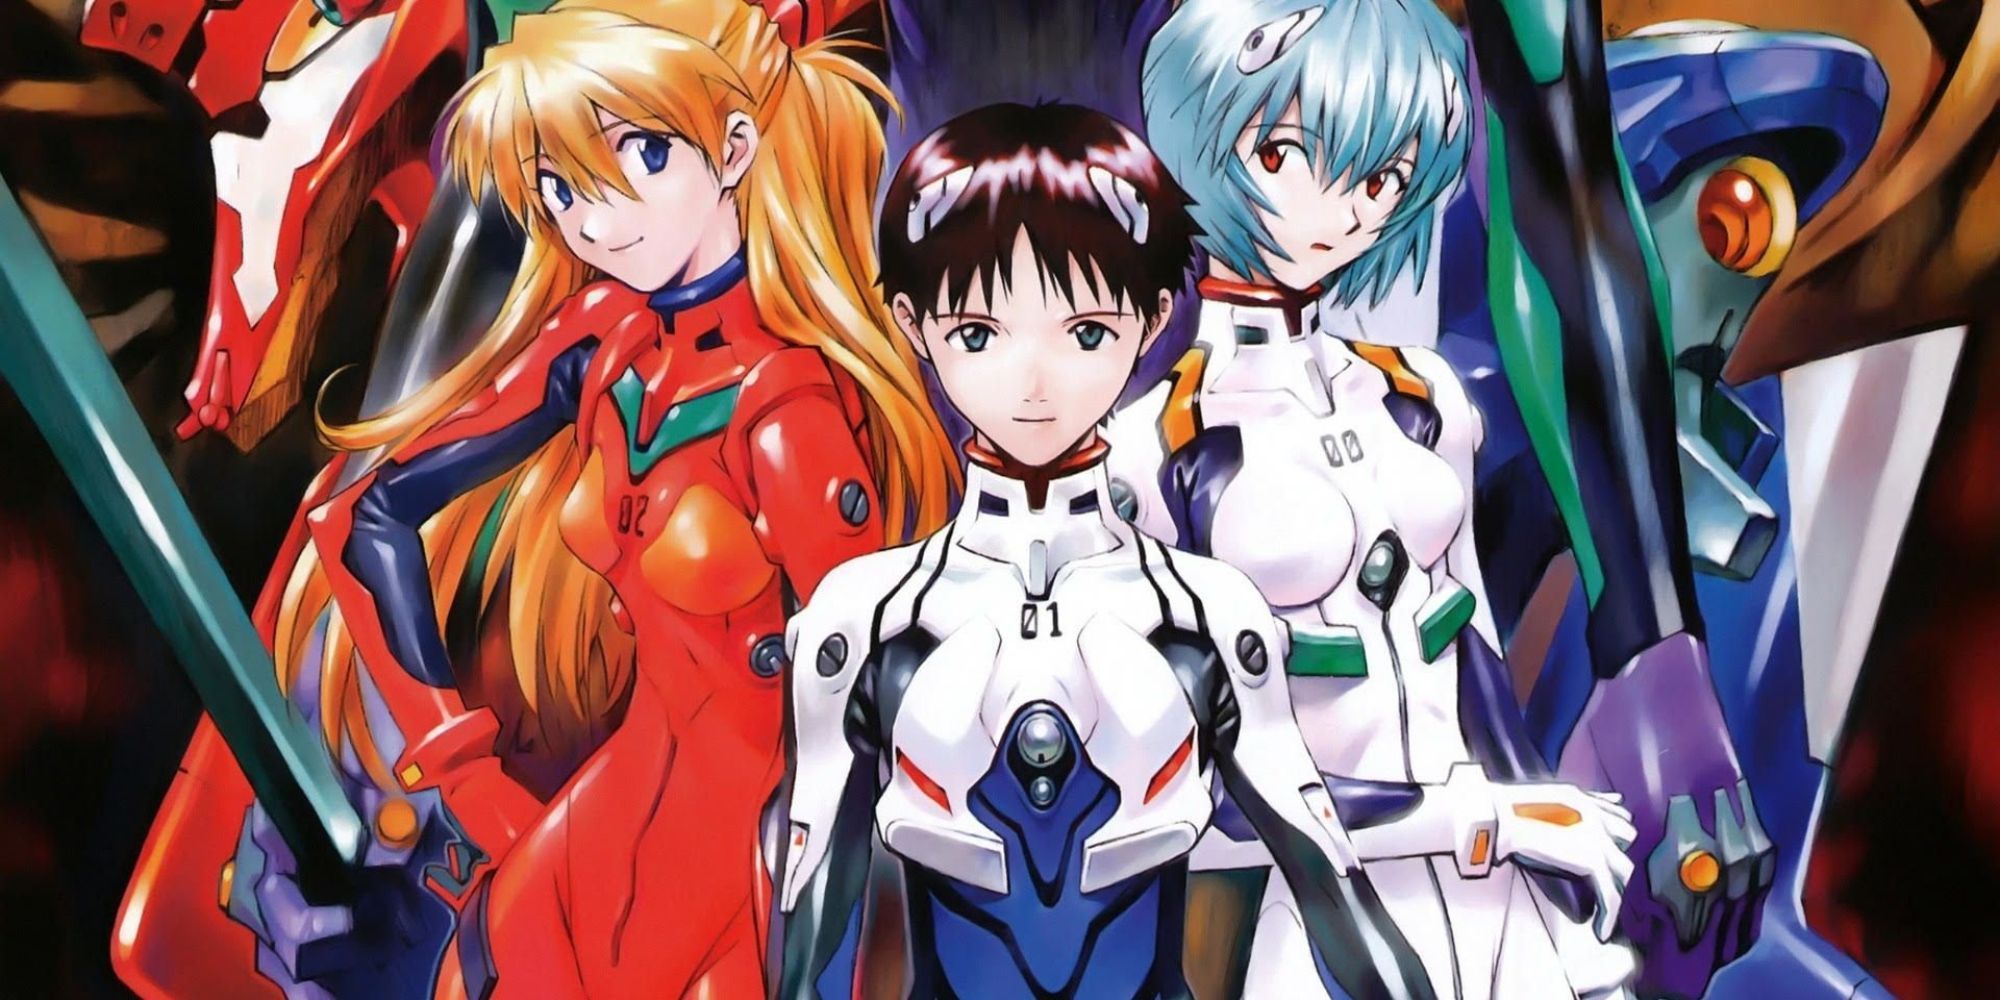 Evangelion characters standing together 